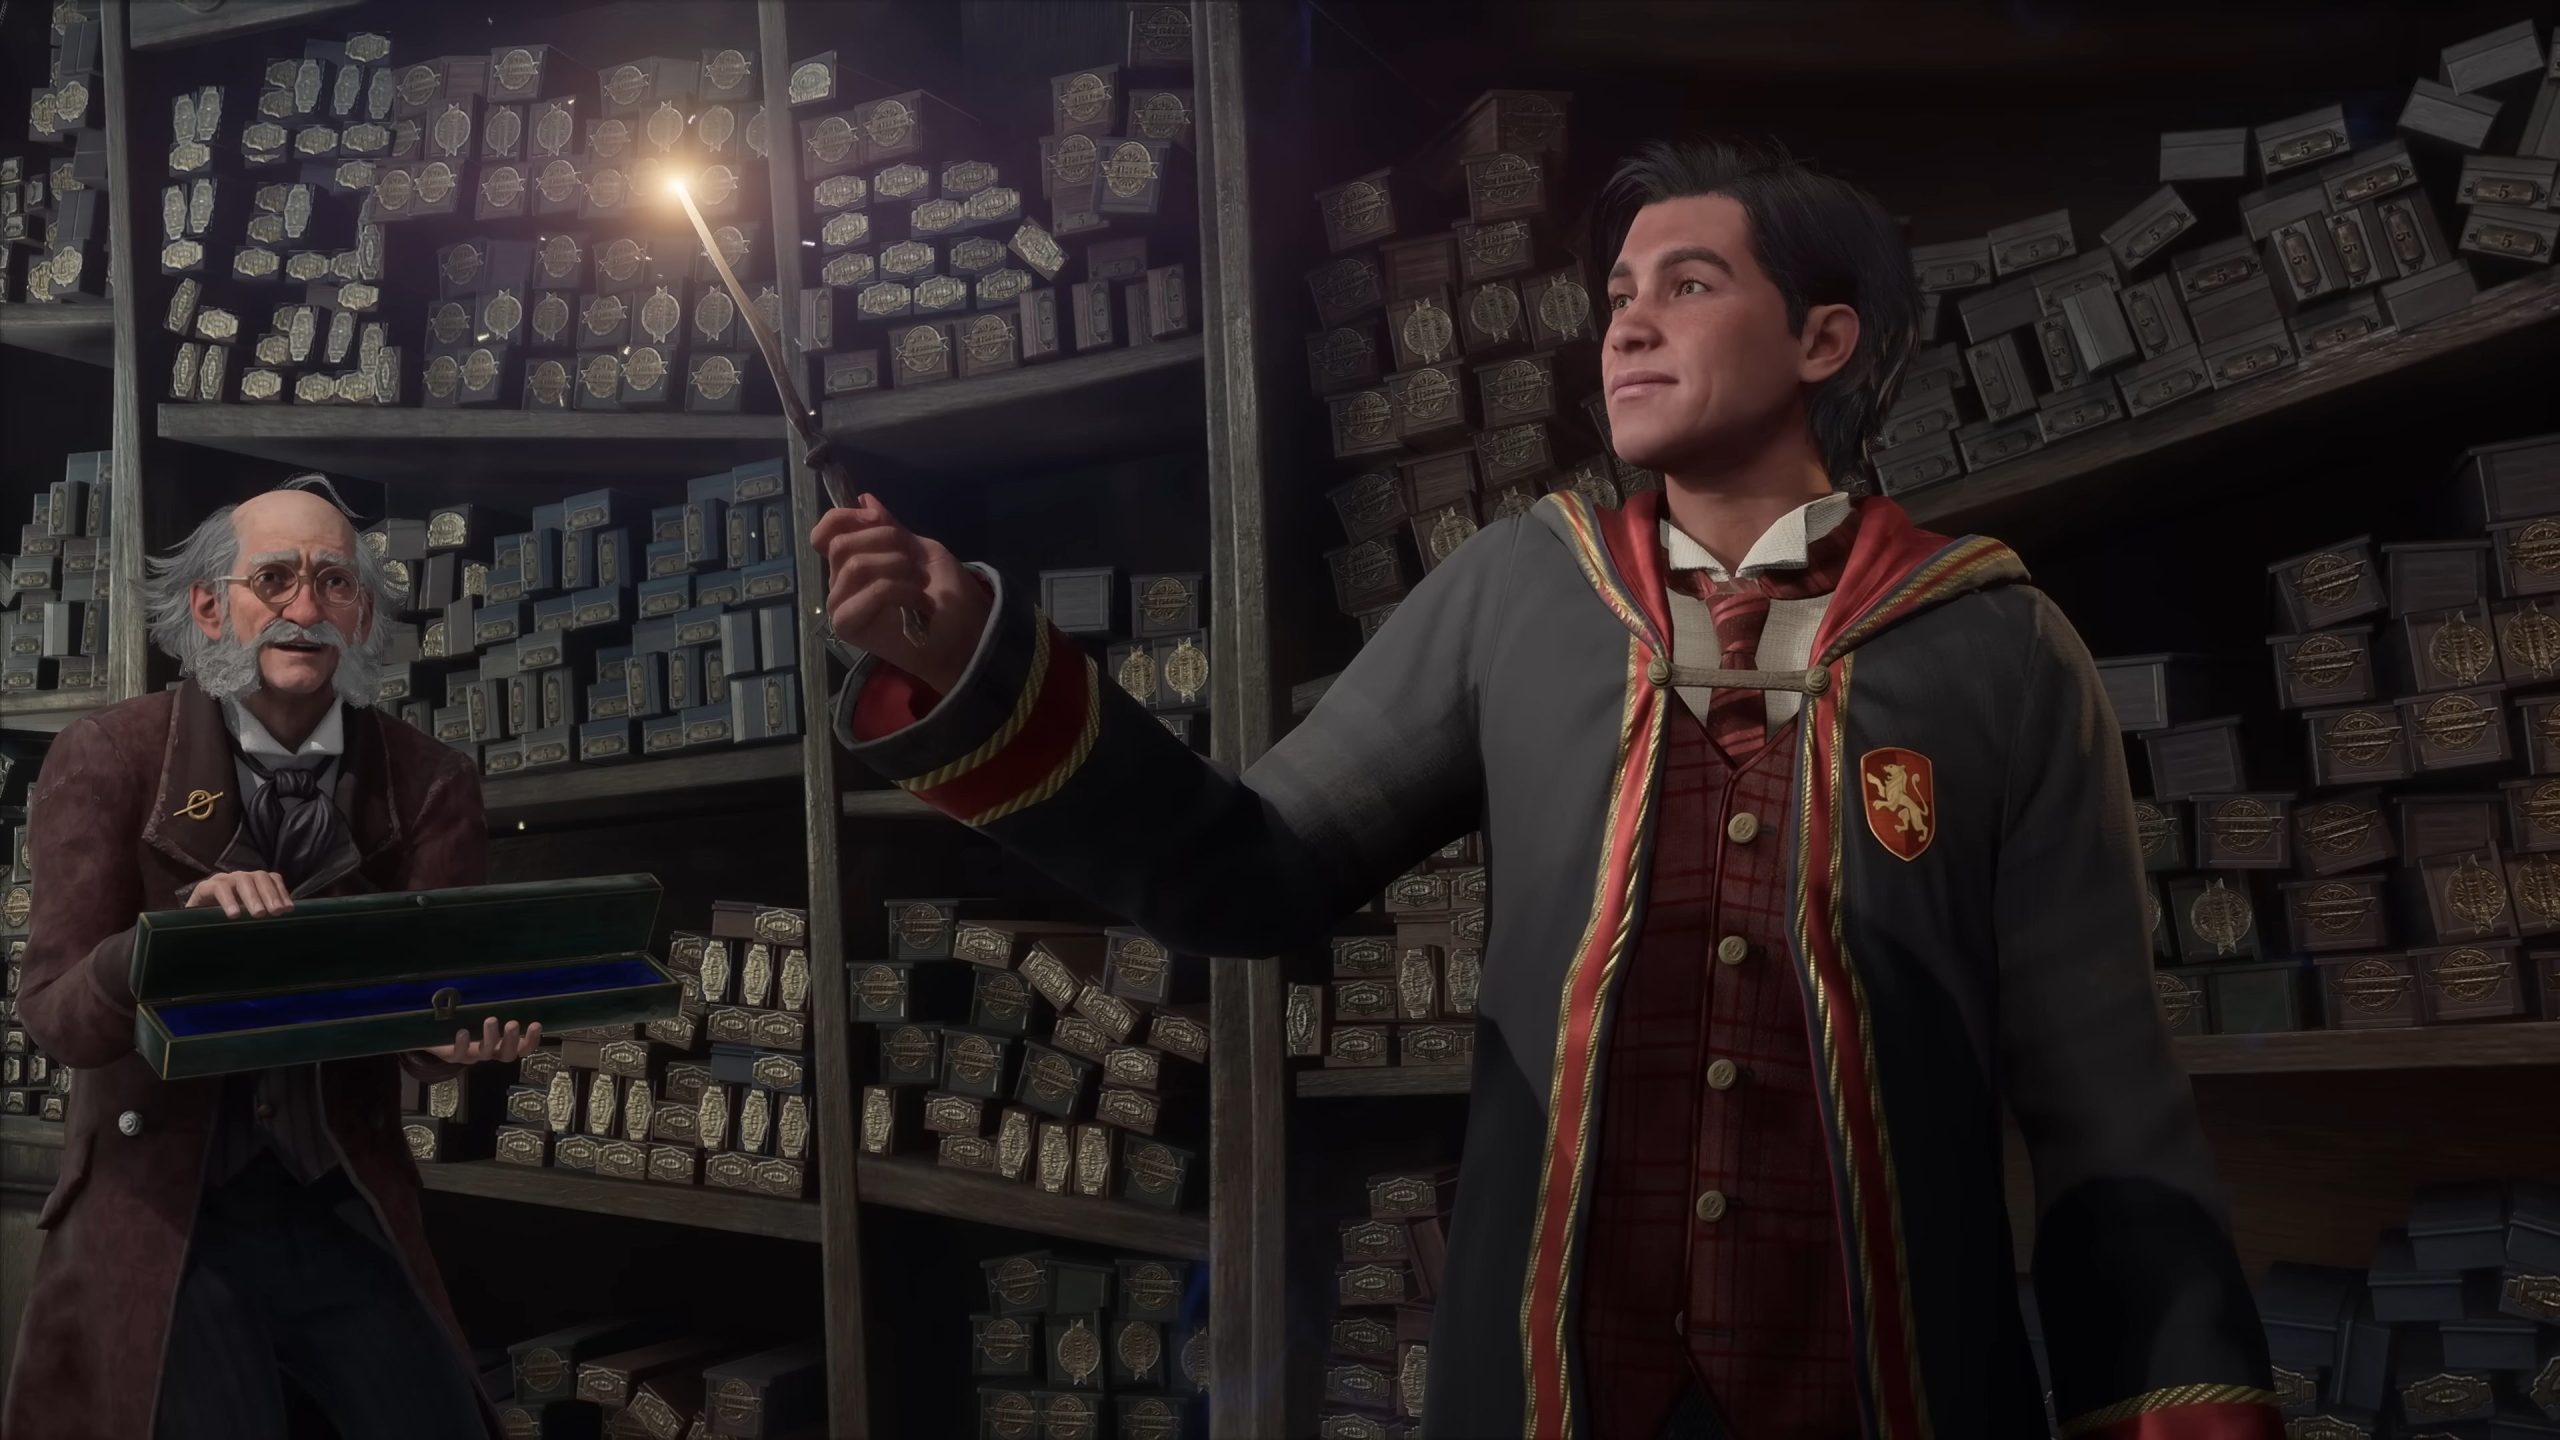 Hogwarts Legacy Map Chamber achievements add around eight hours to  completion